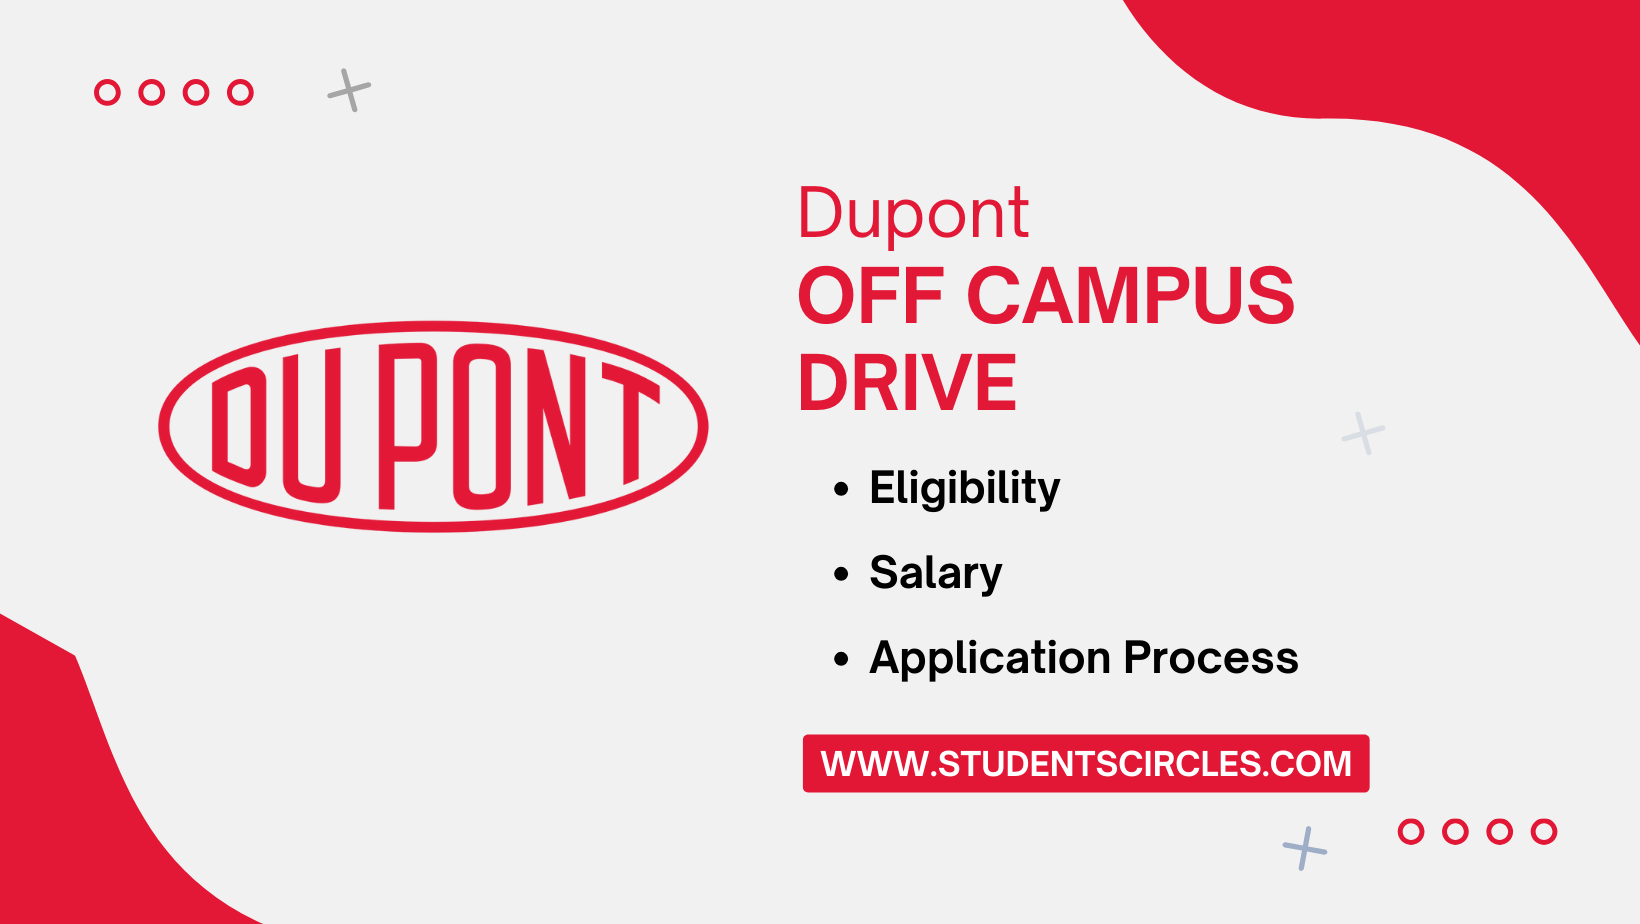 Dupont Off Campus Drive